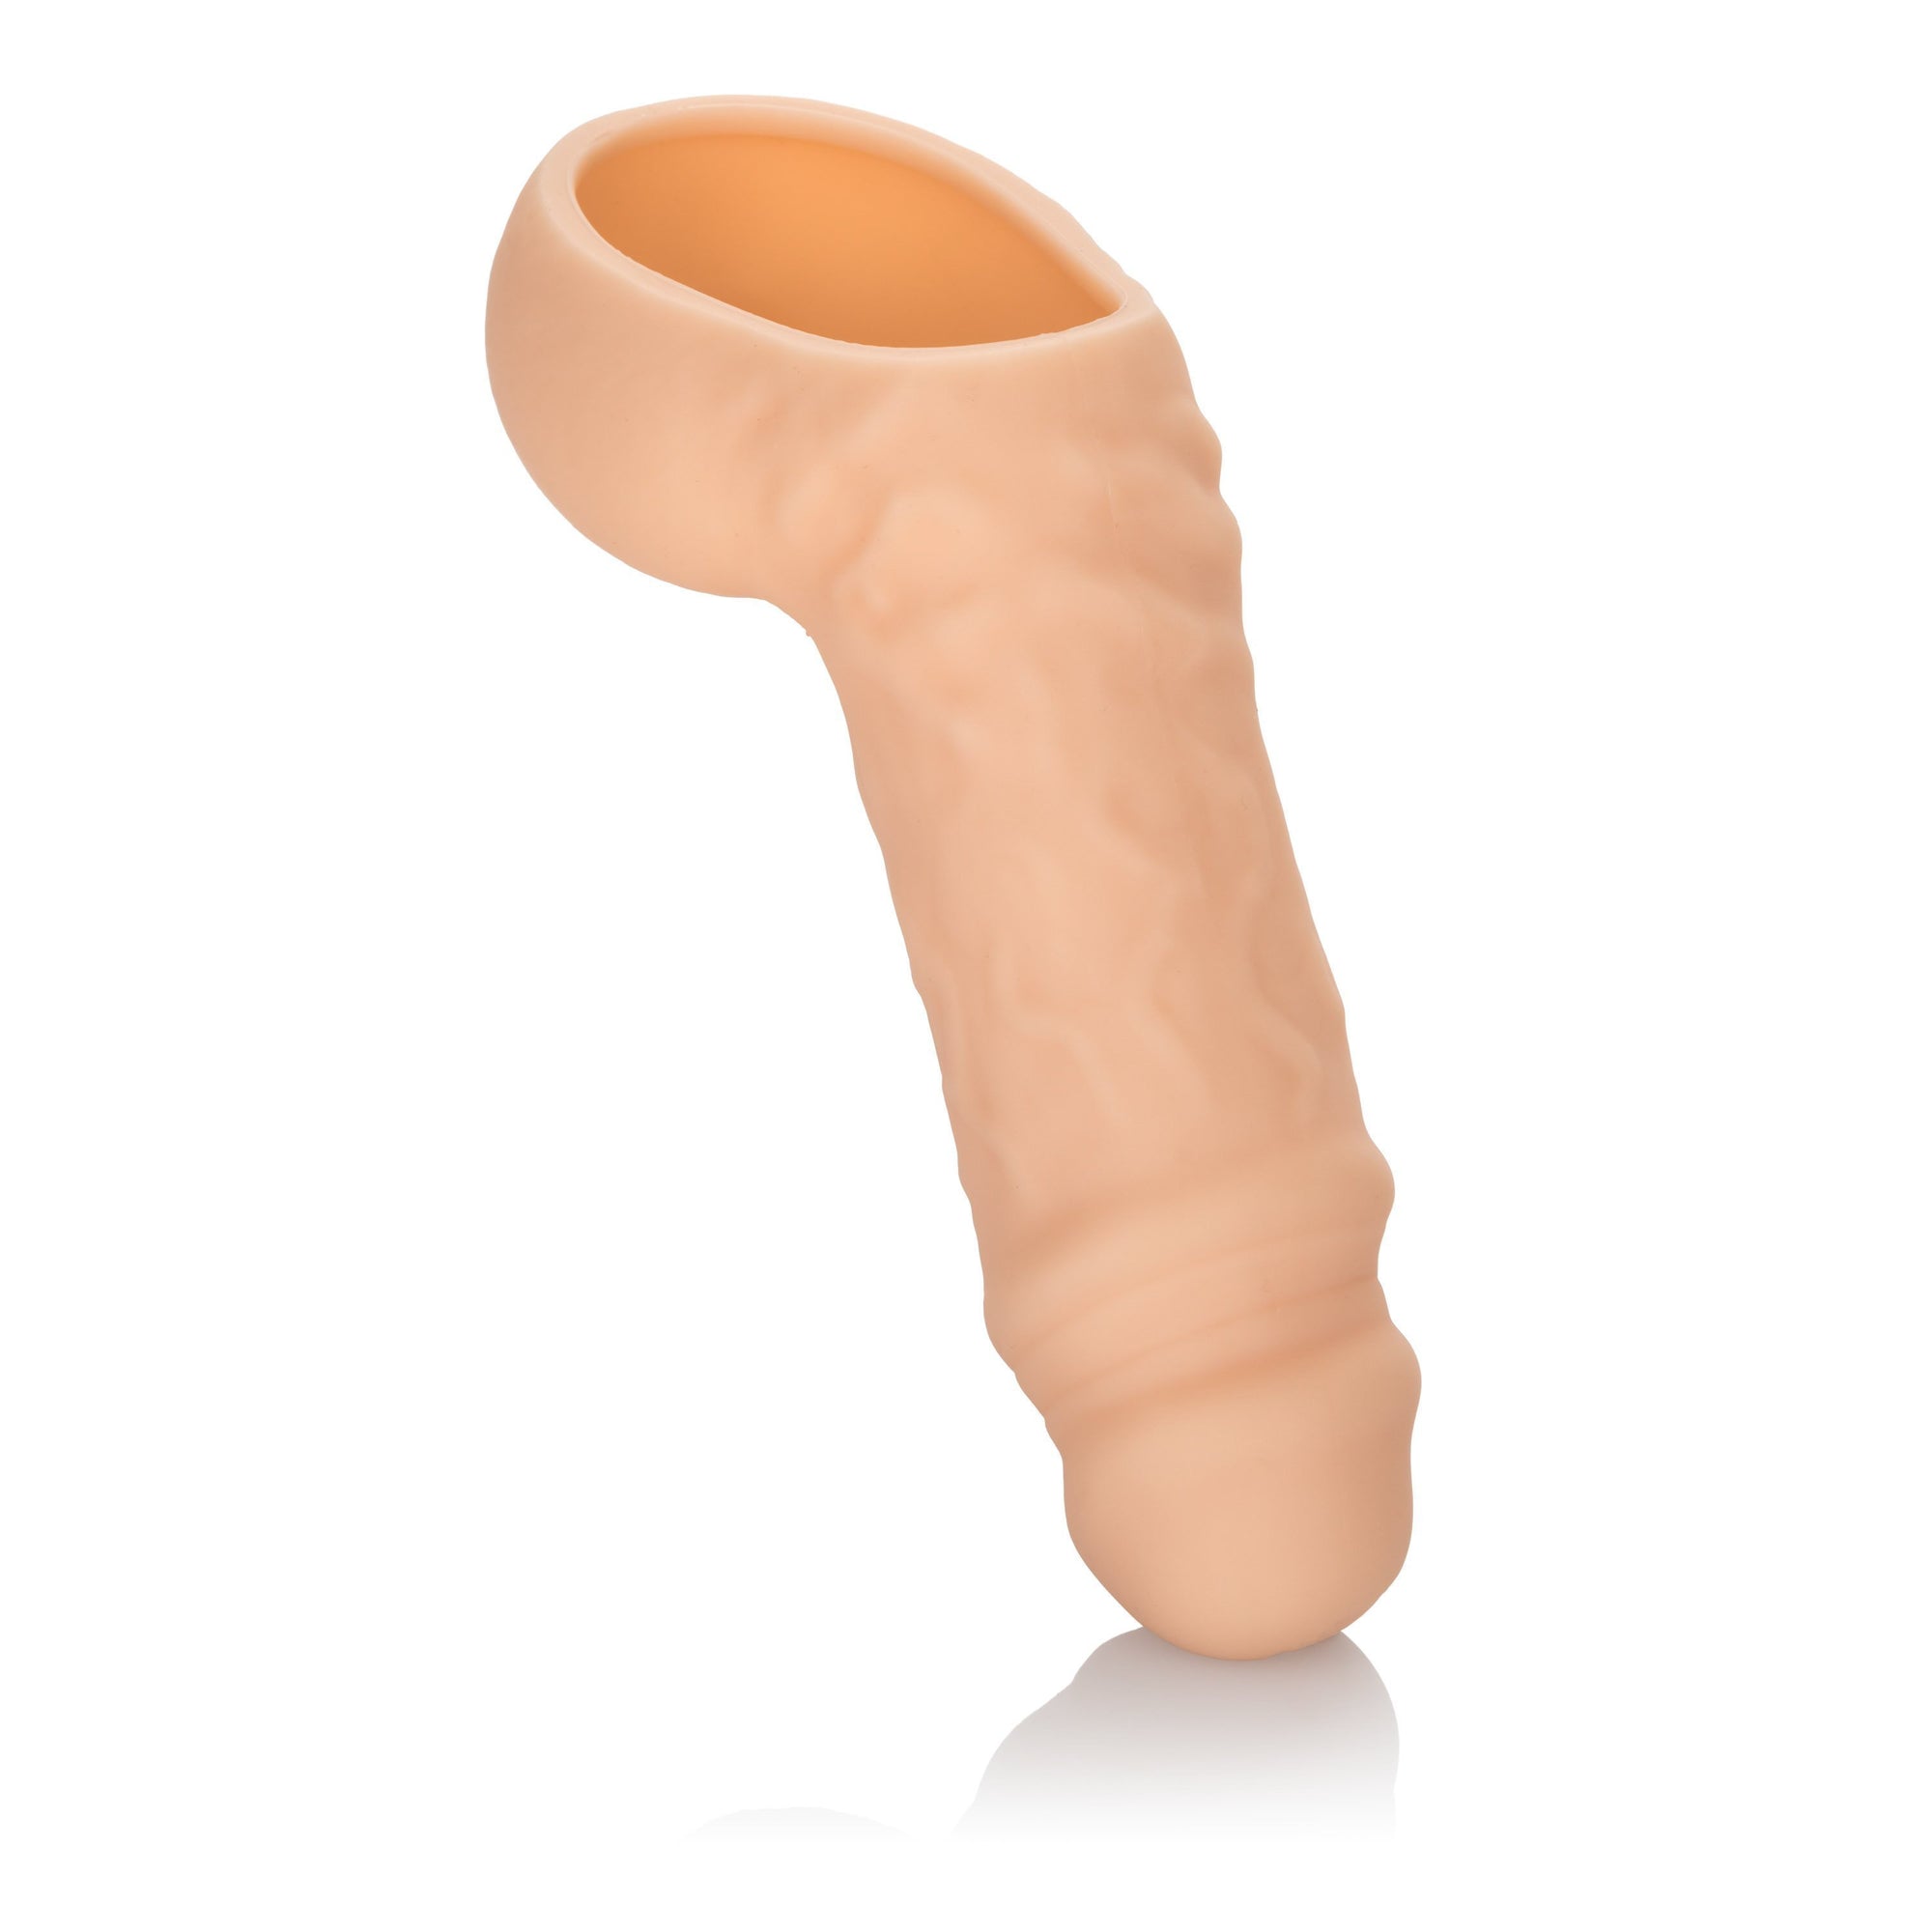 California Exotics - Packer Gear STP Hollow Packer (Beige) Strap On with Hollow Dildo for Male (Non Vibration)